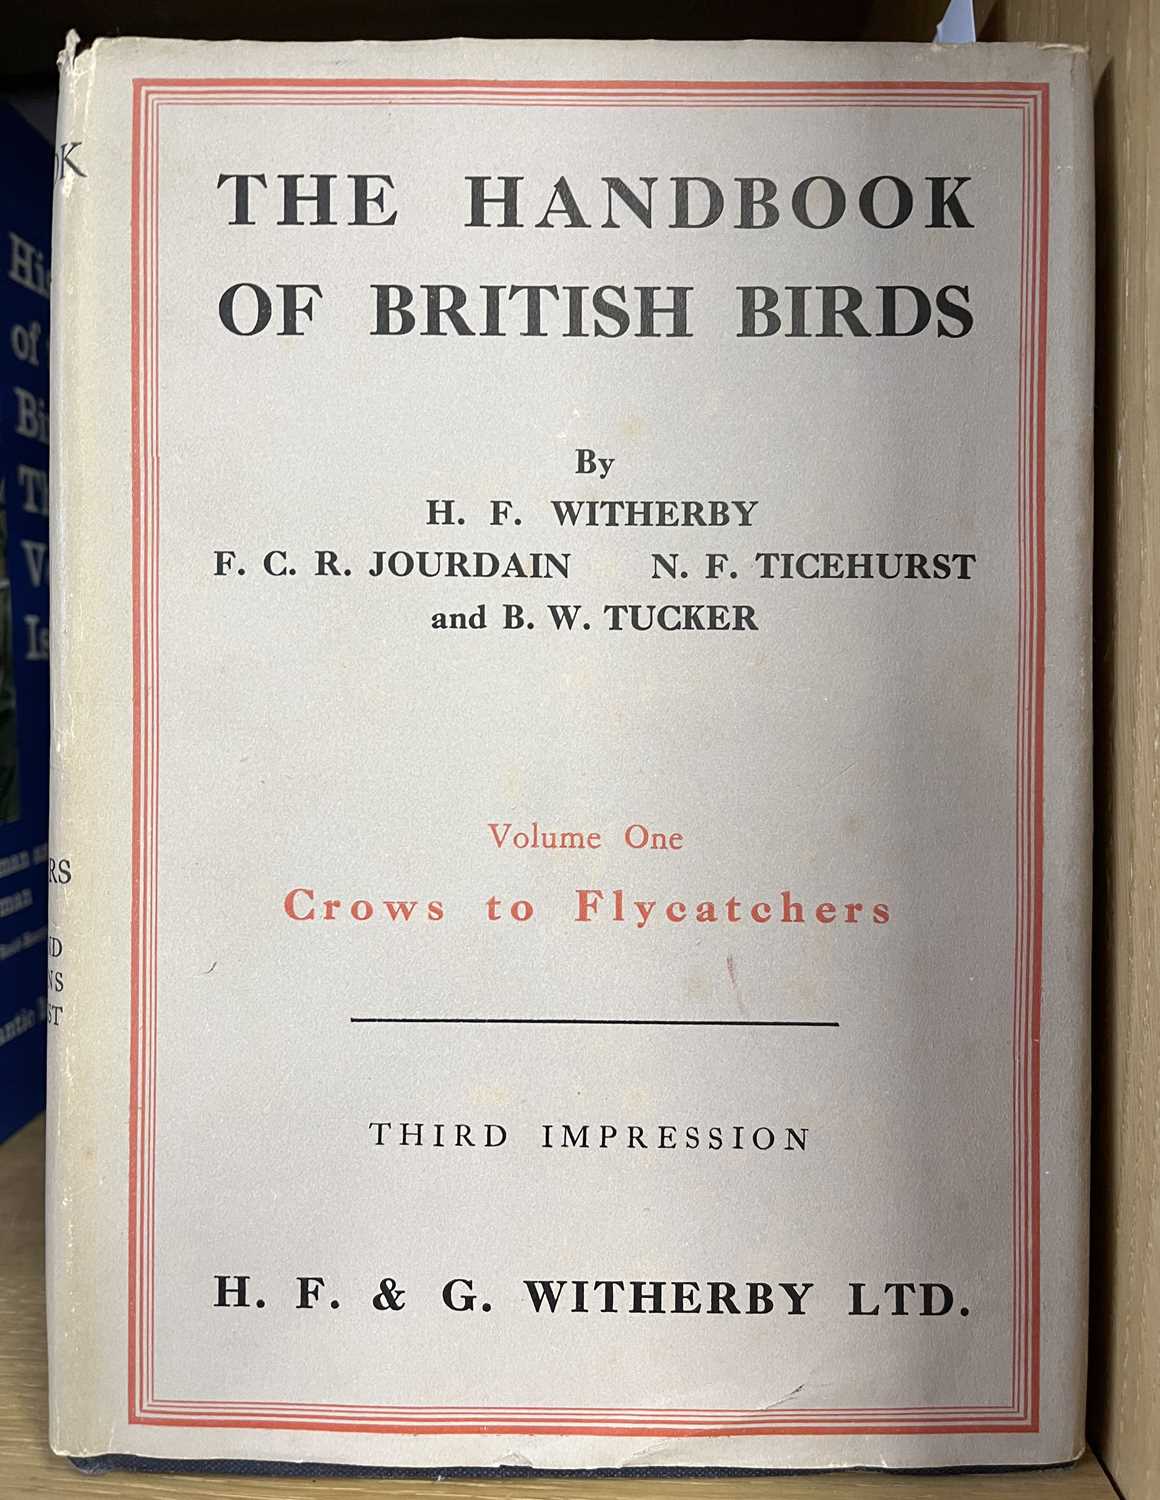 Handbook of British Birds by Witherby, published London, H F & G Witherby, Edited also by - Image 2 of 5